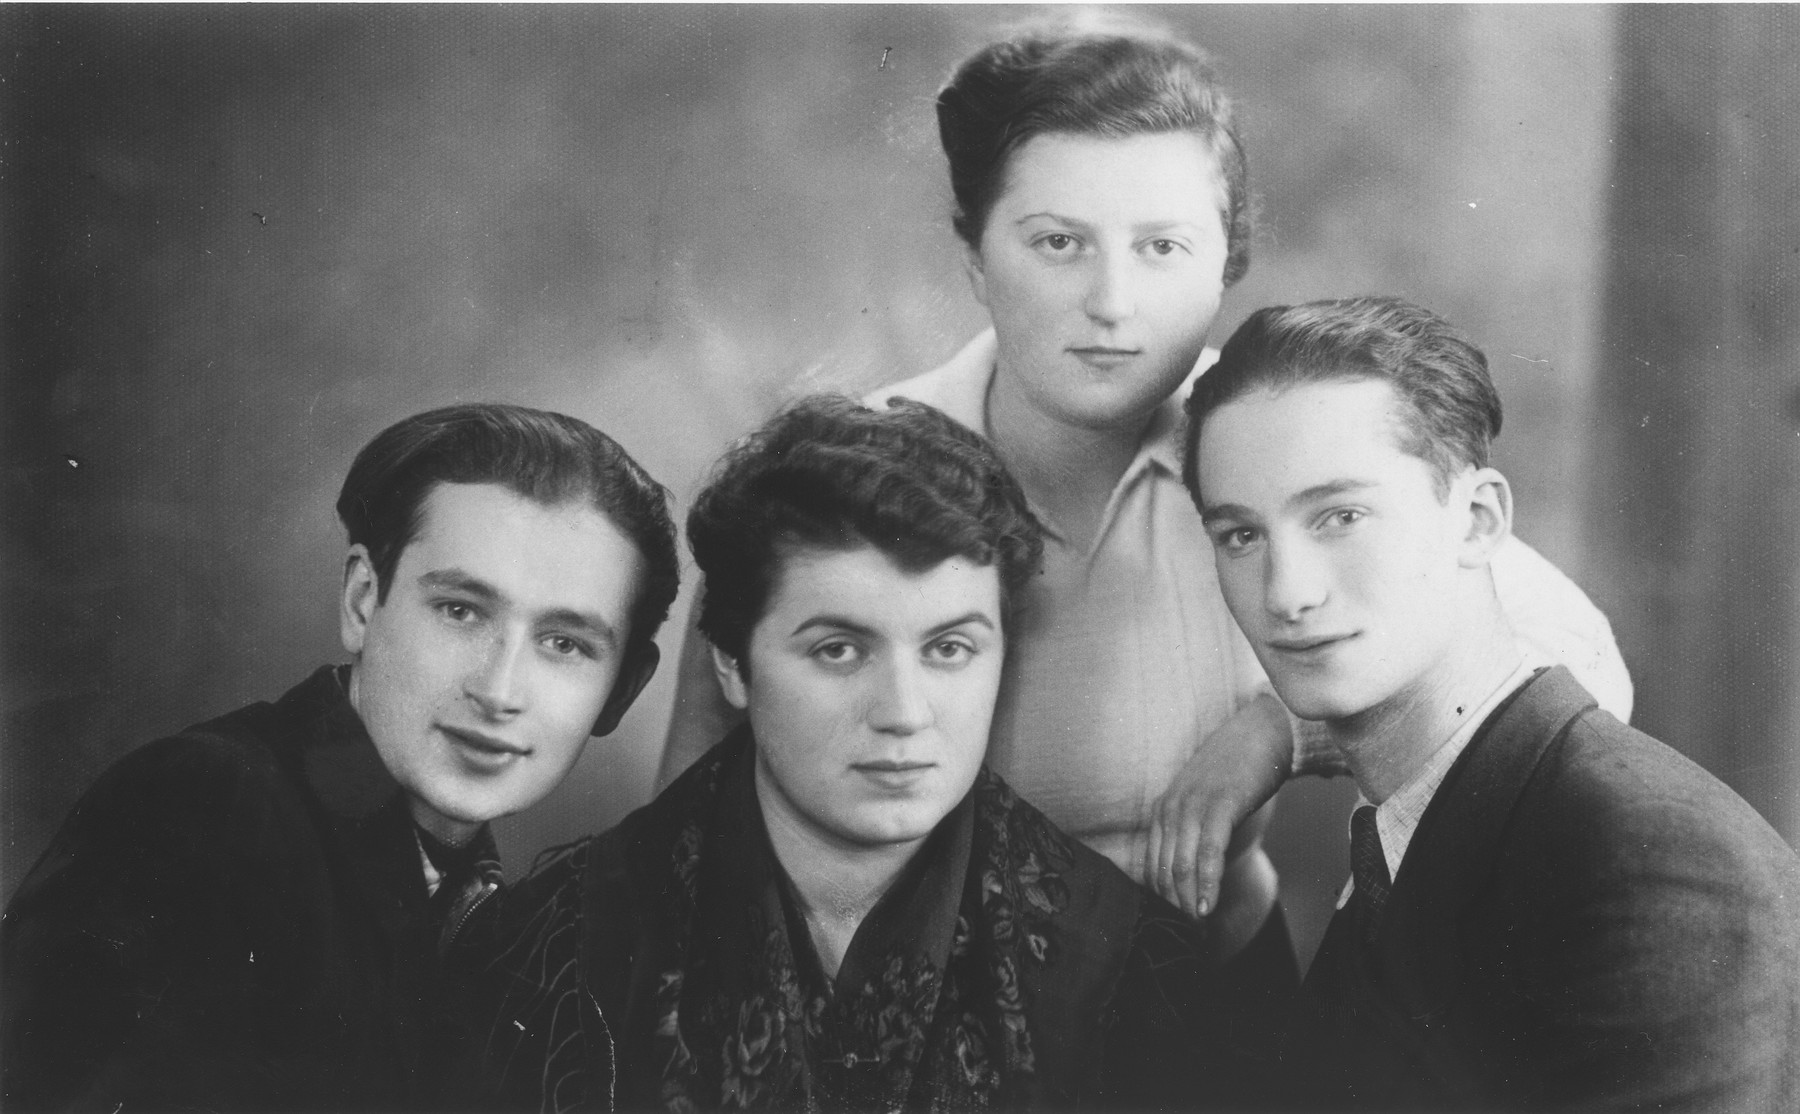 Renia Zylberszac poses with friends in the Dabrowa ghetto.  

Pictured clockwise from the top are: Renia Zylberszac, Otto Szwerd, Mania Gorset and Arnold Weisfelner.